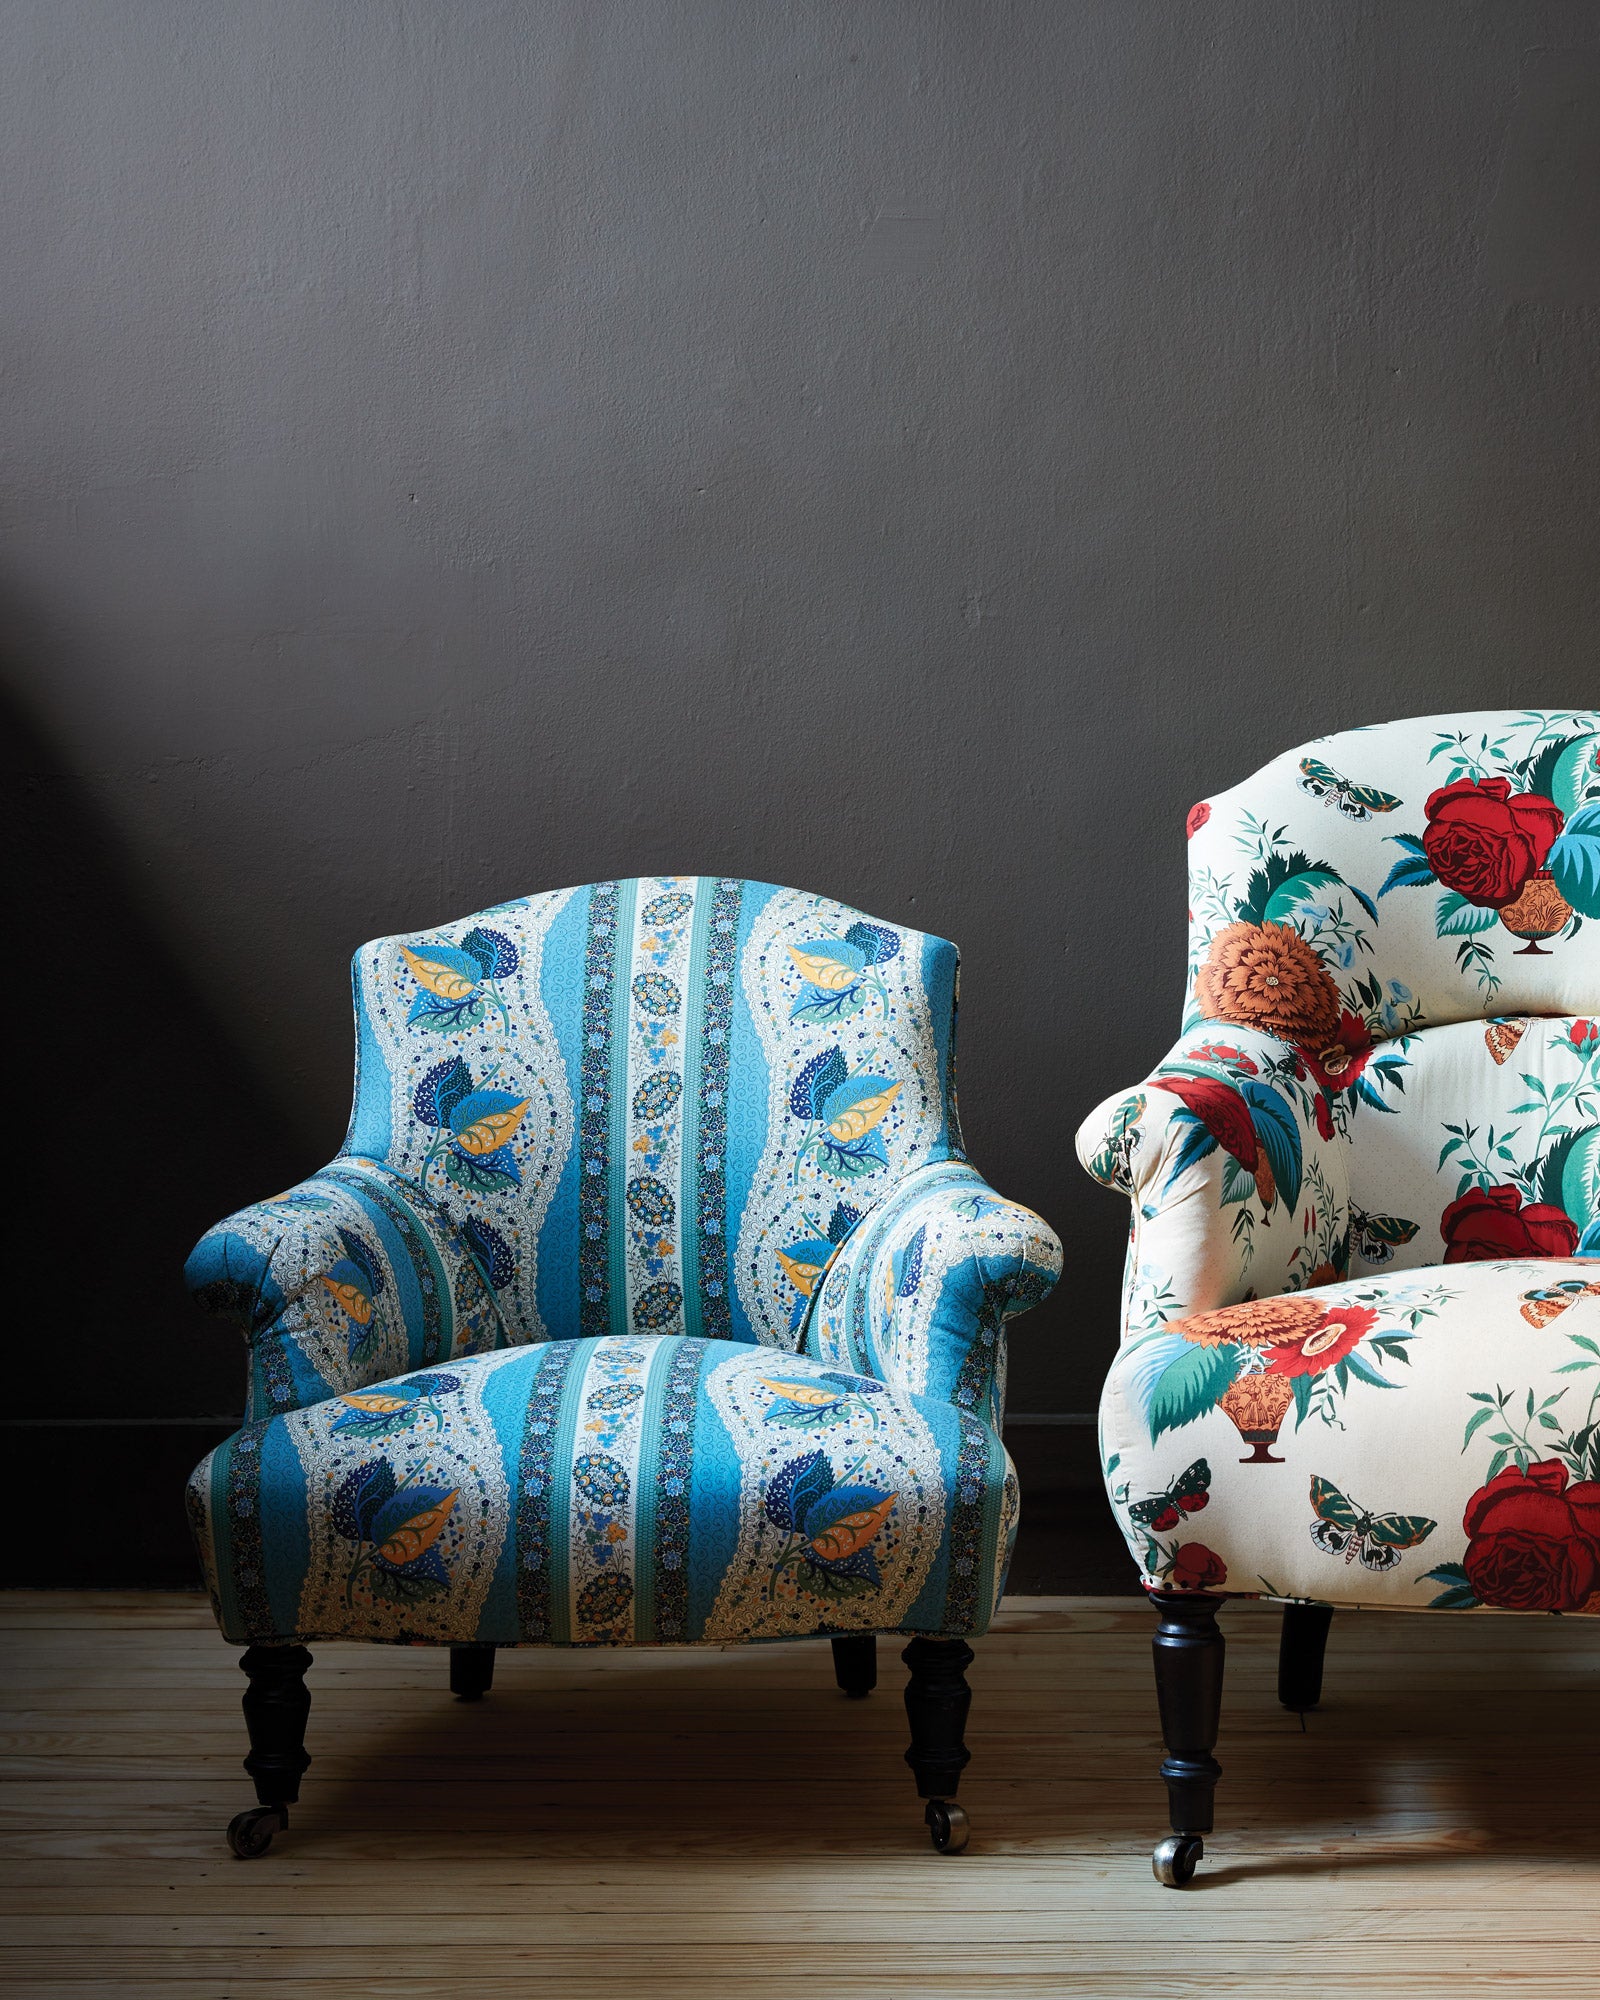  Two chairs in printed John Derian Fabric with a dark wall in the background. Photographed in John Derian Fabric. 